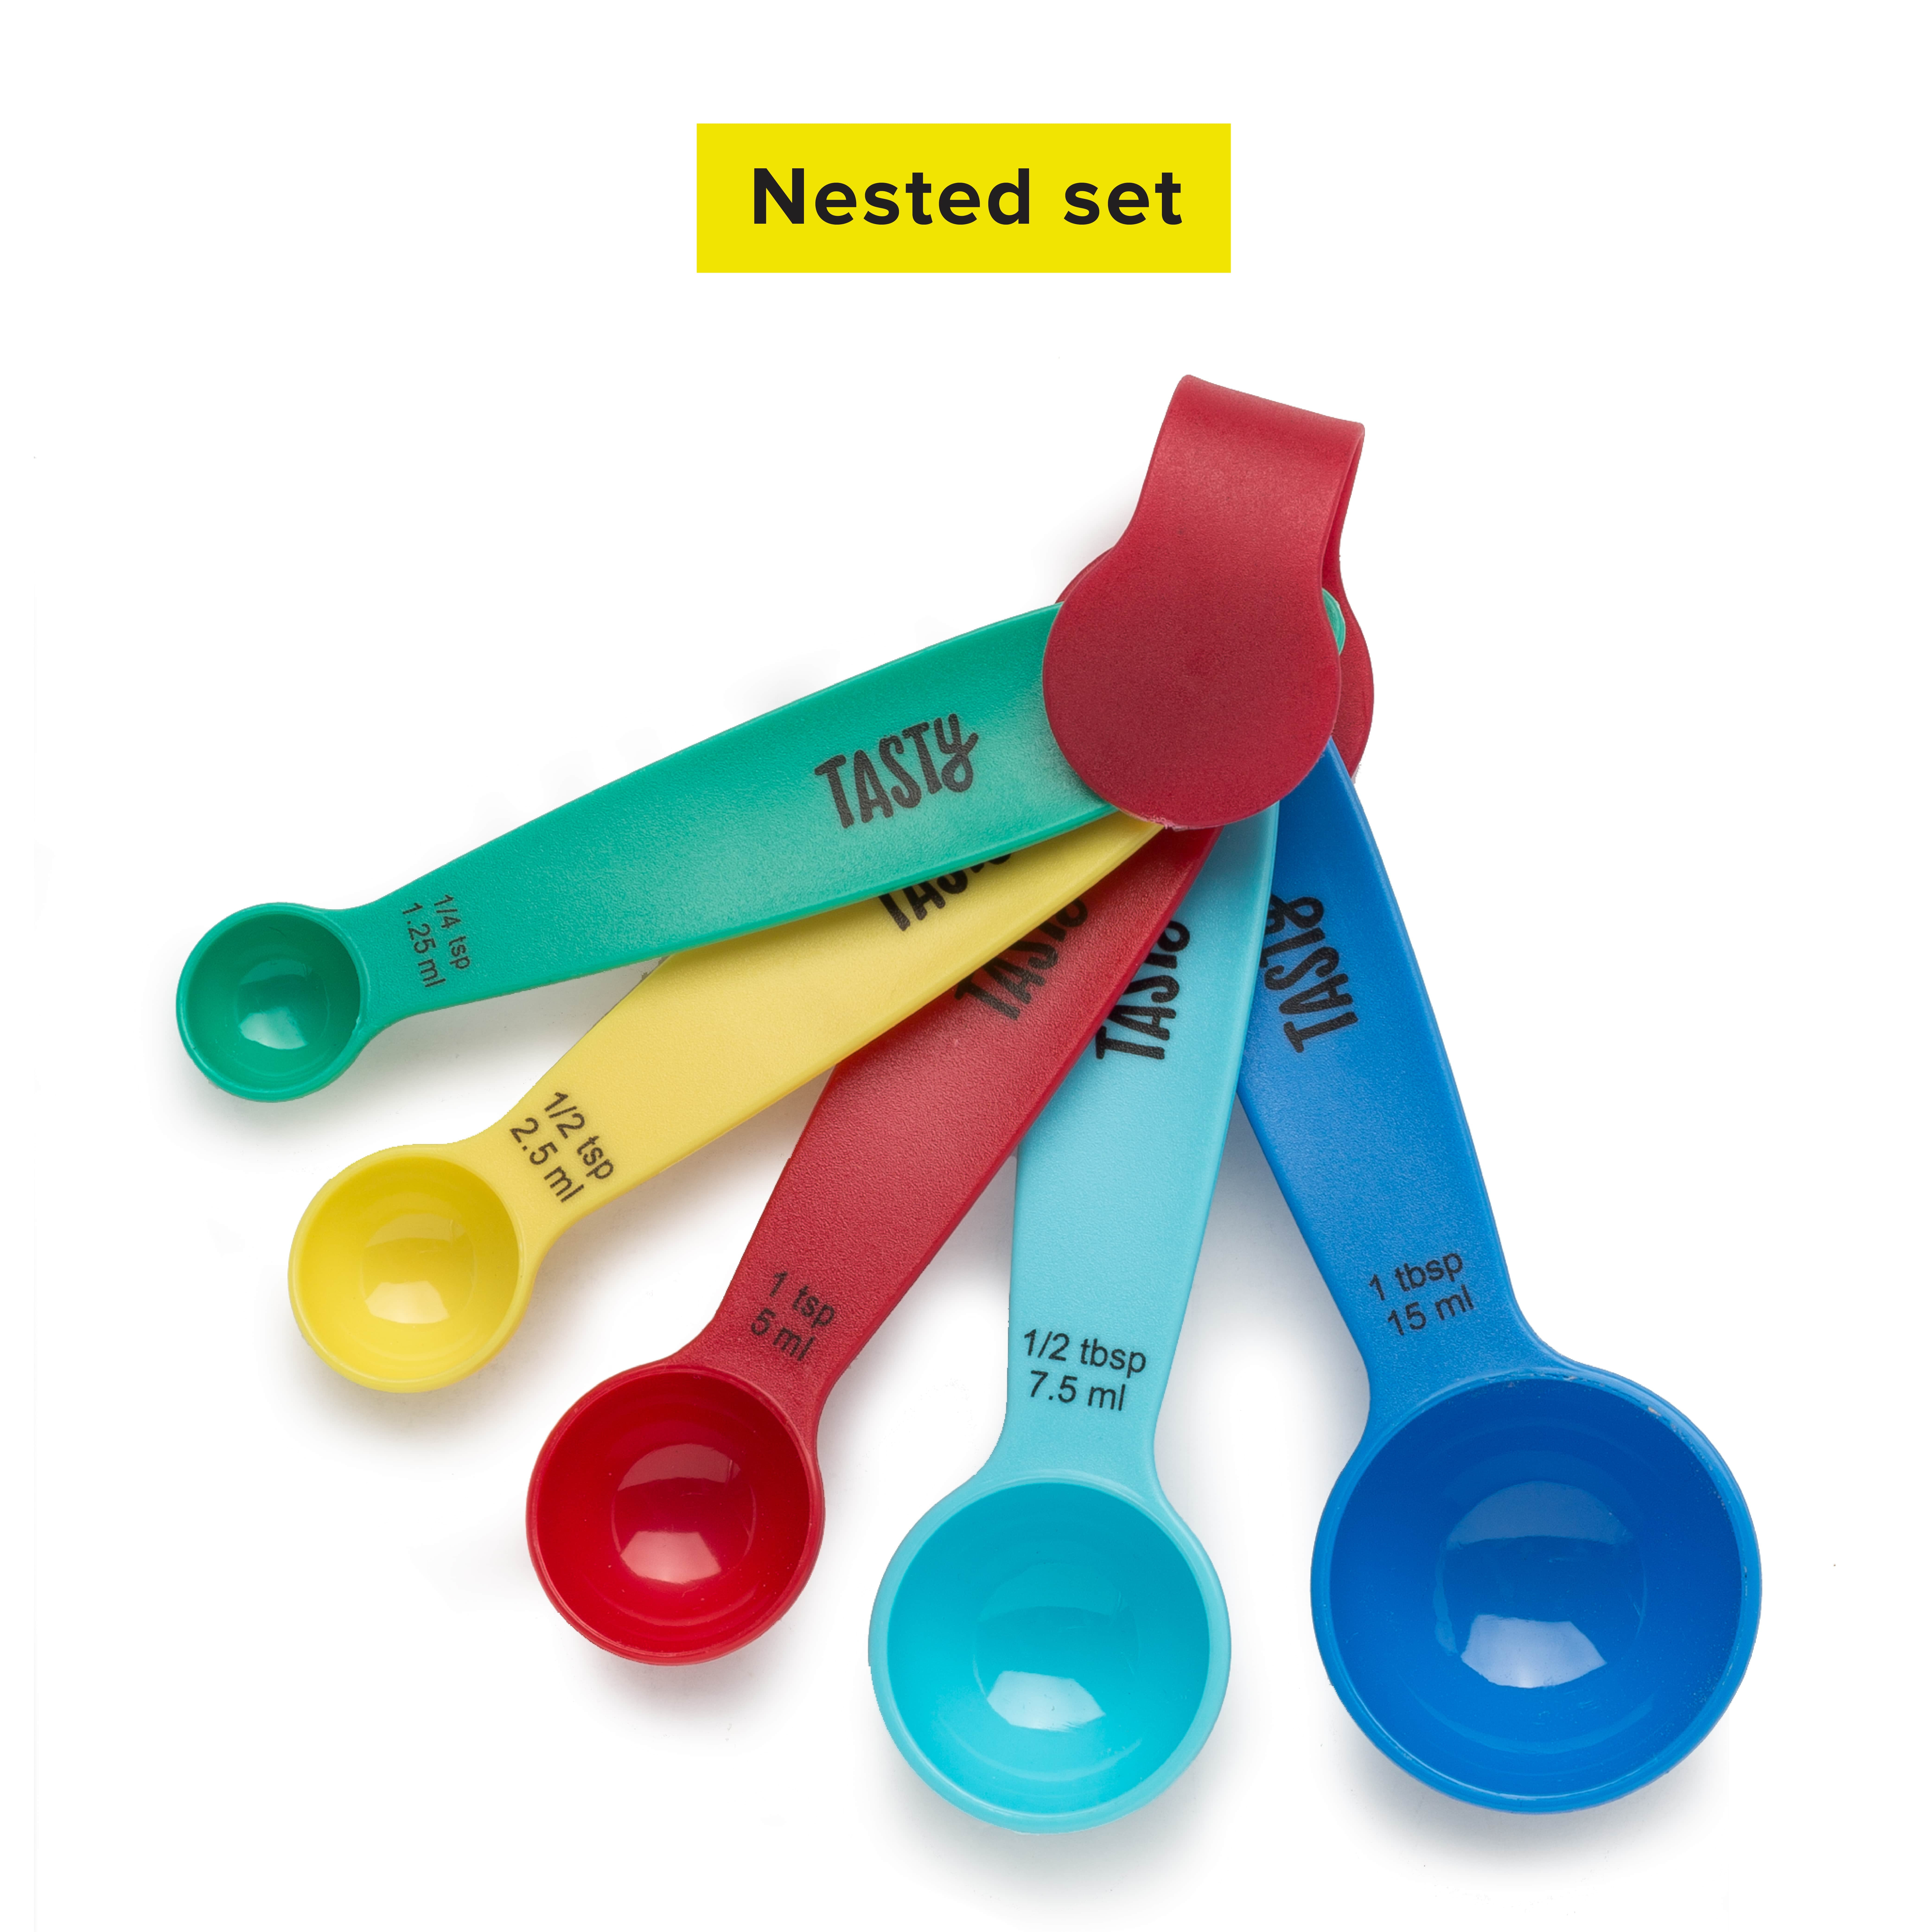 Measuring Cups and Spoons – CuttleLab